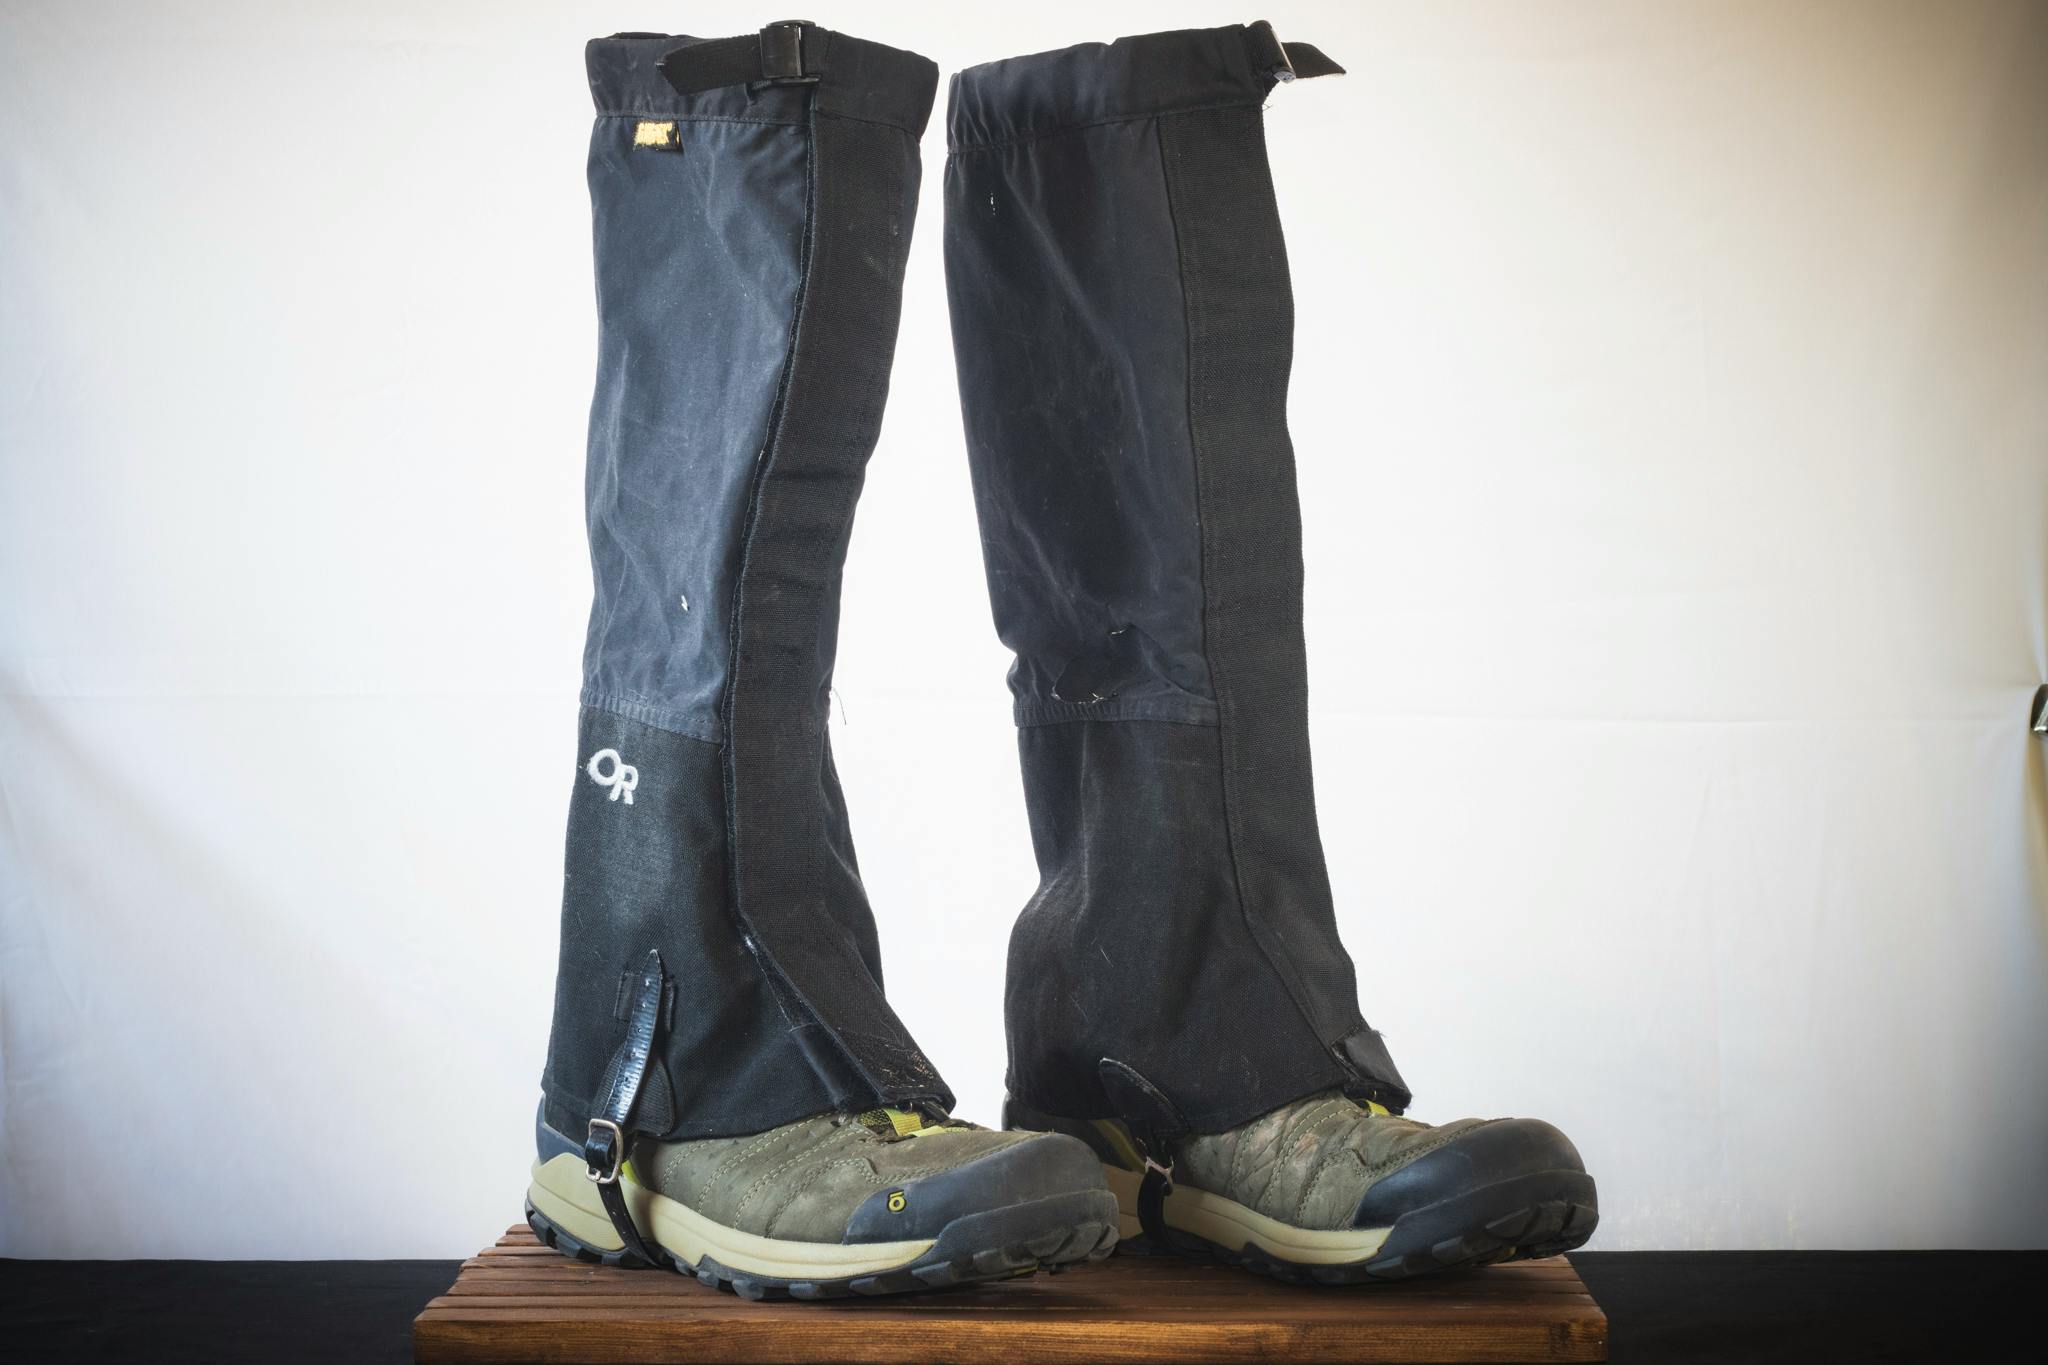 A pair of shoes with some long gaiters.